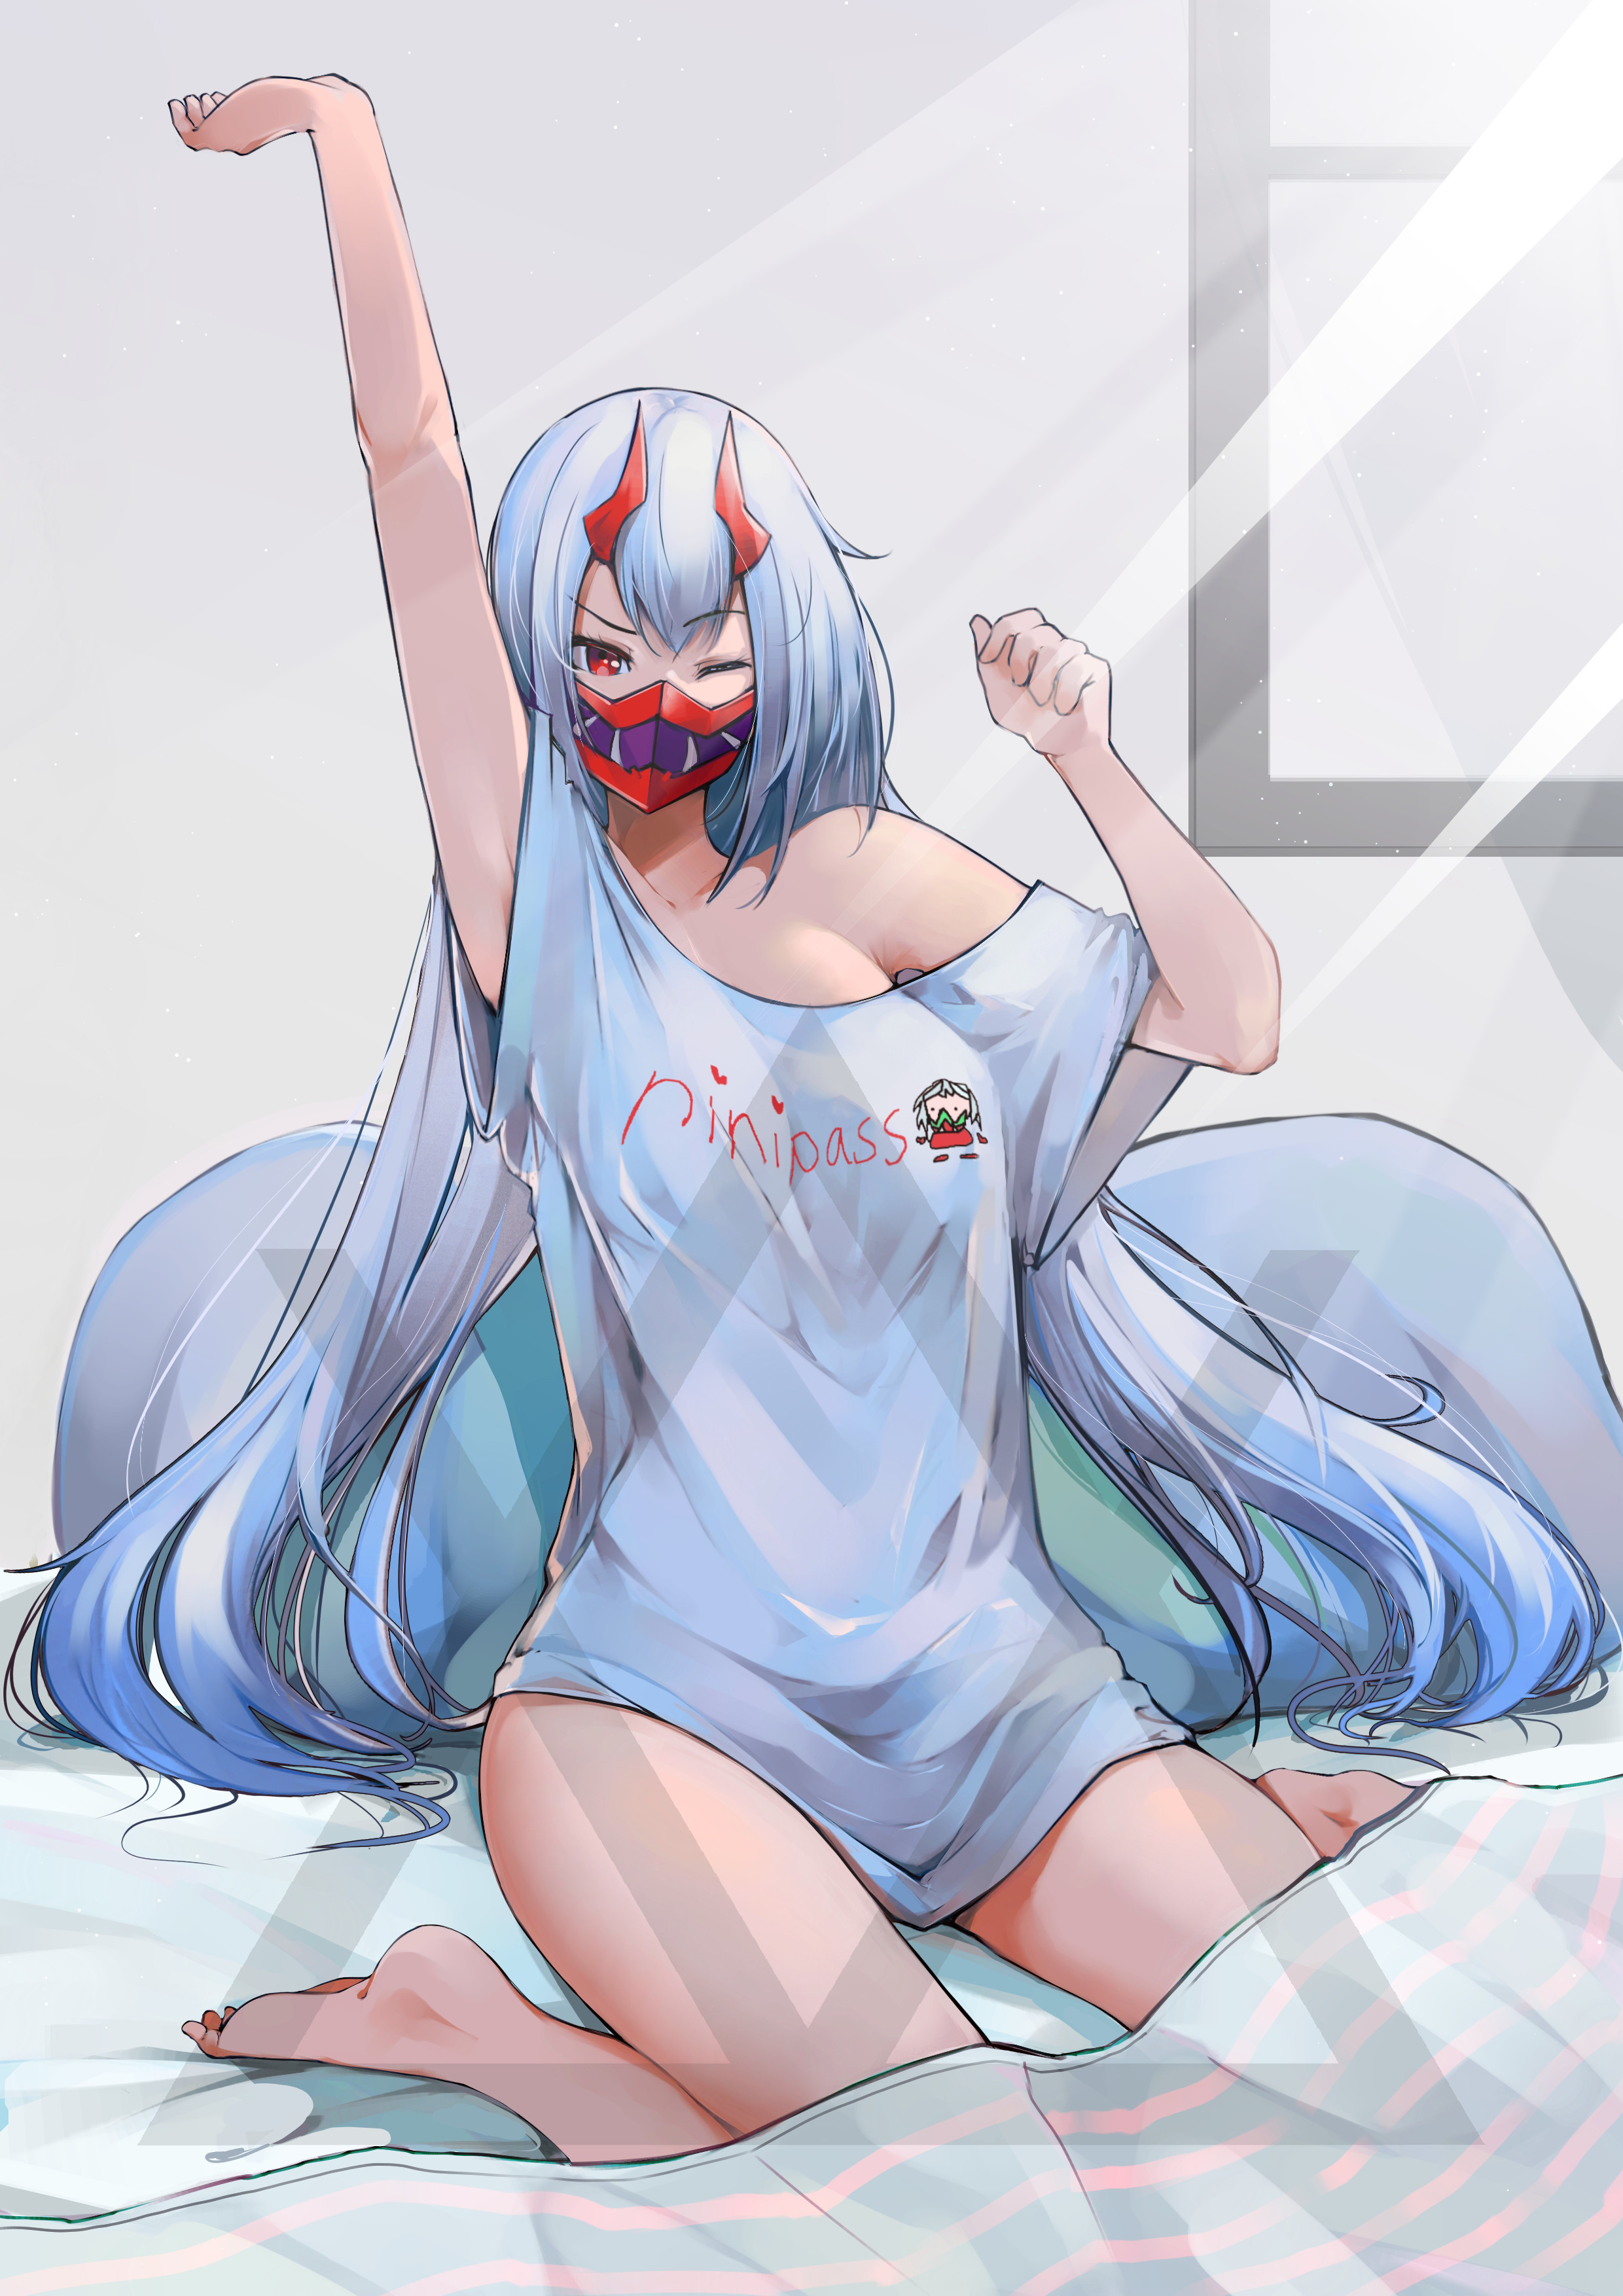 Anime Mask Women Anime Girls Long Hair Barefoot One Eye Closed Arms Up Red Eyes In Bed Portrait Disp 2480x3508